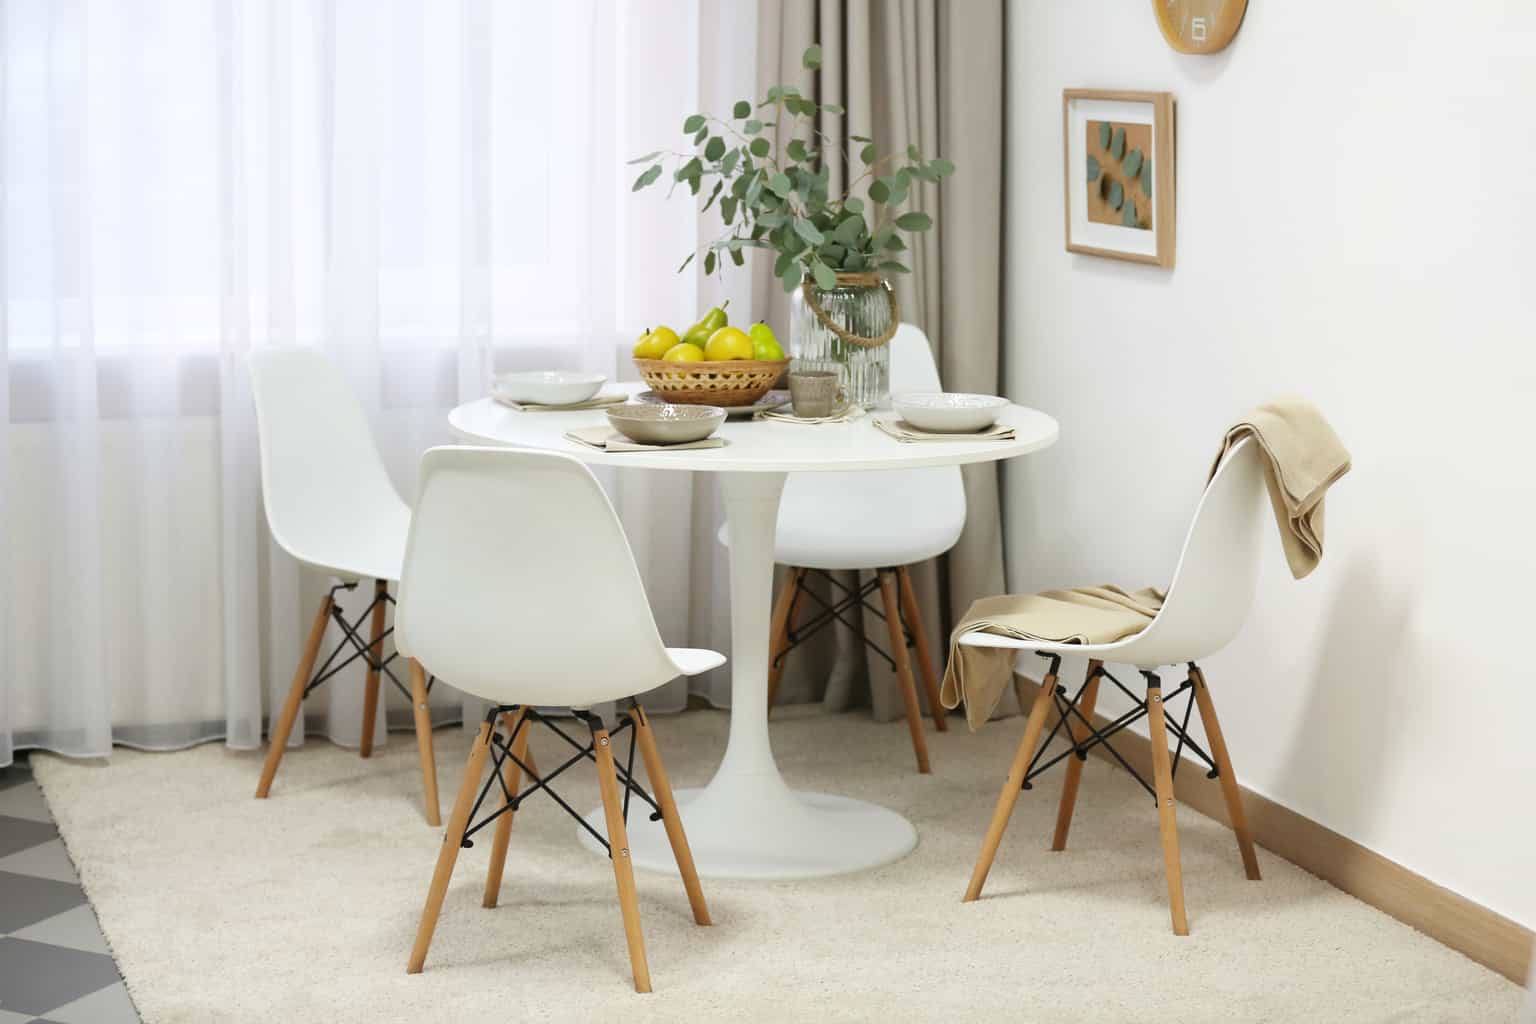 How to Fit a Dining Table in a Small Living Room